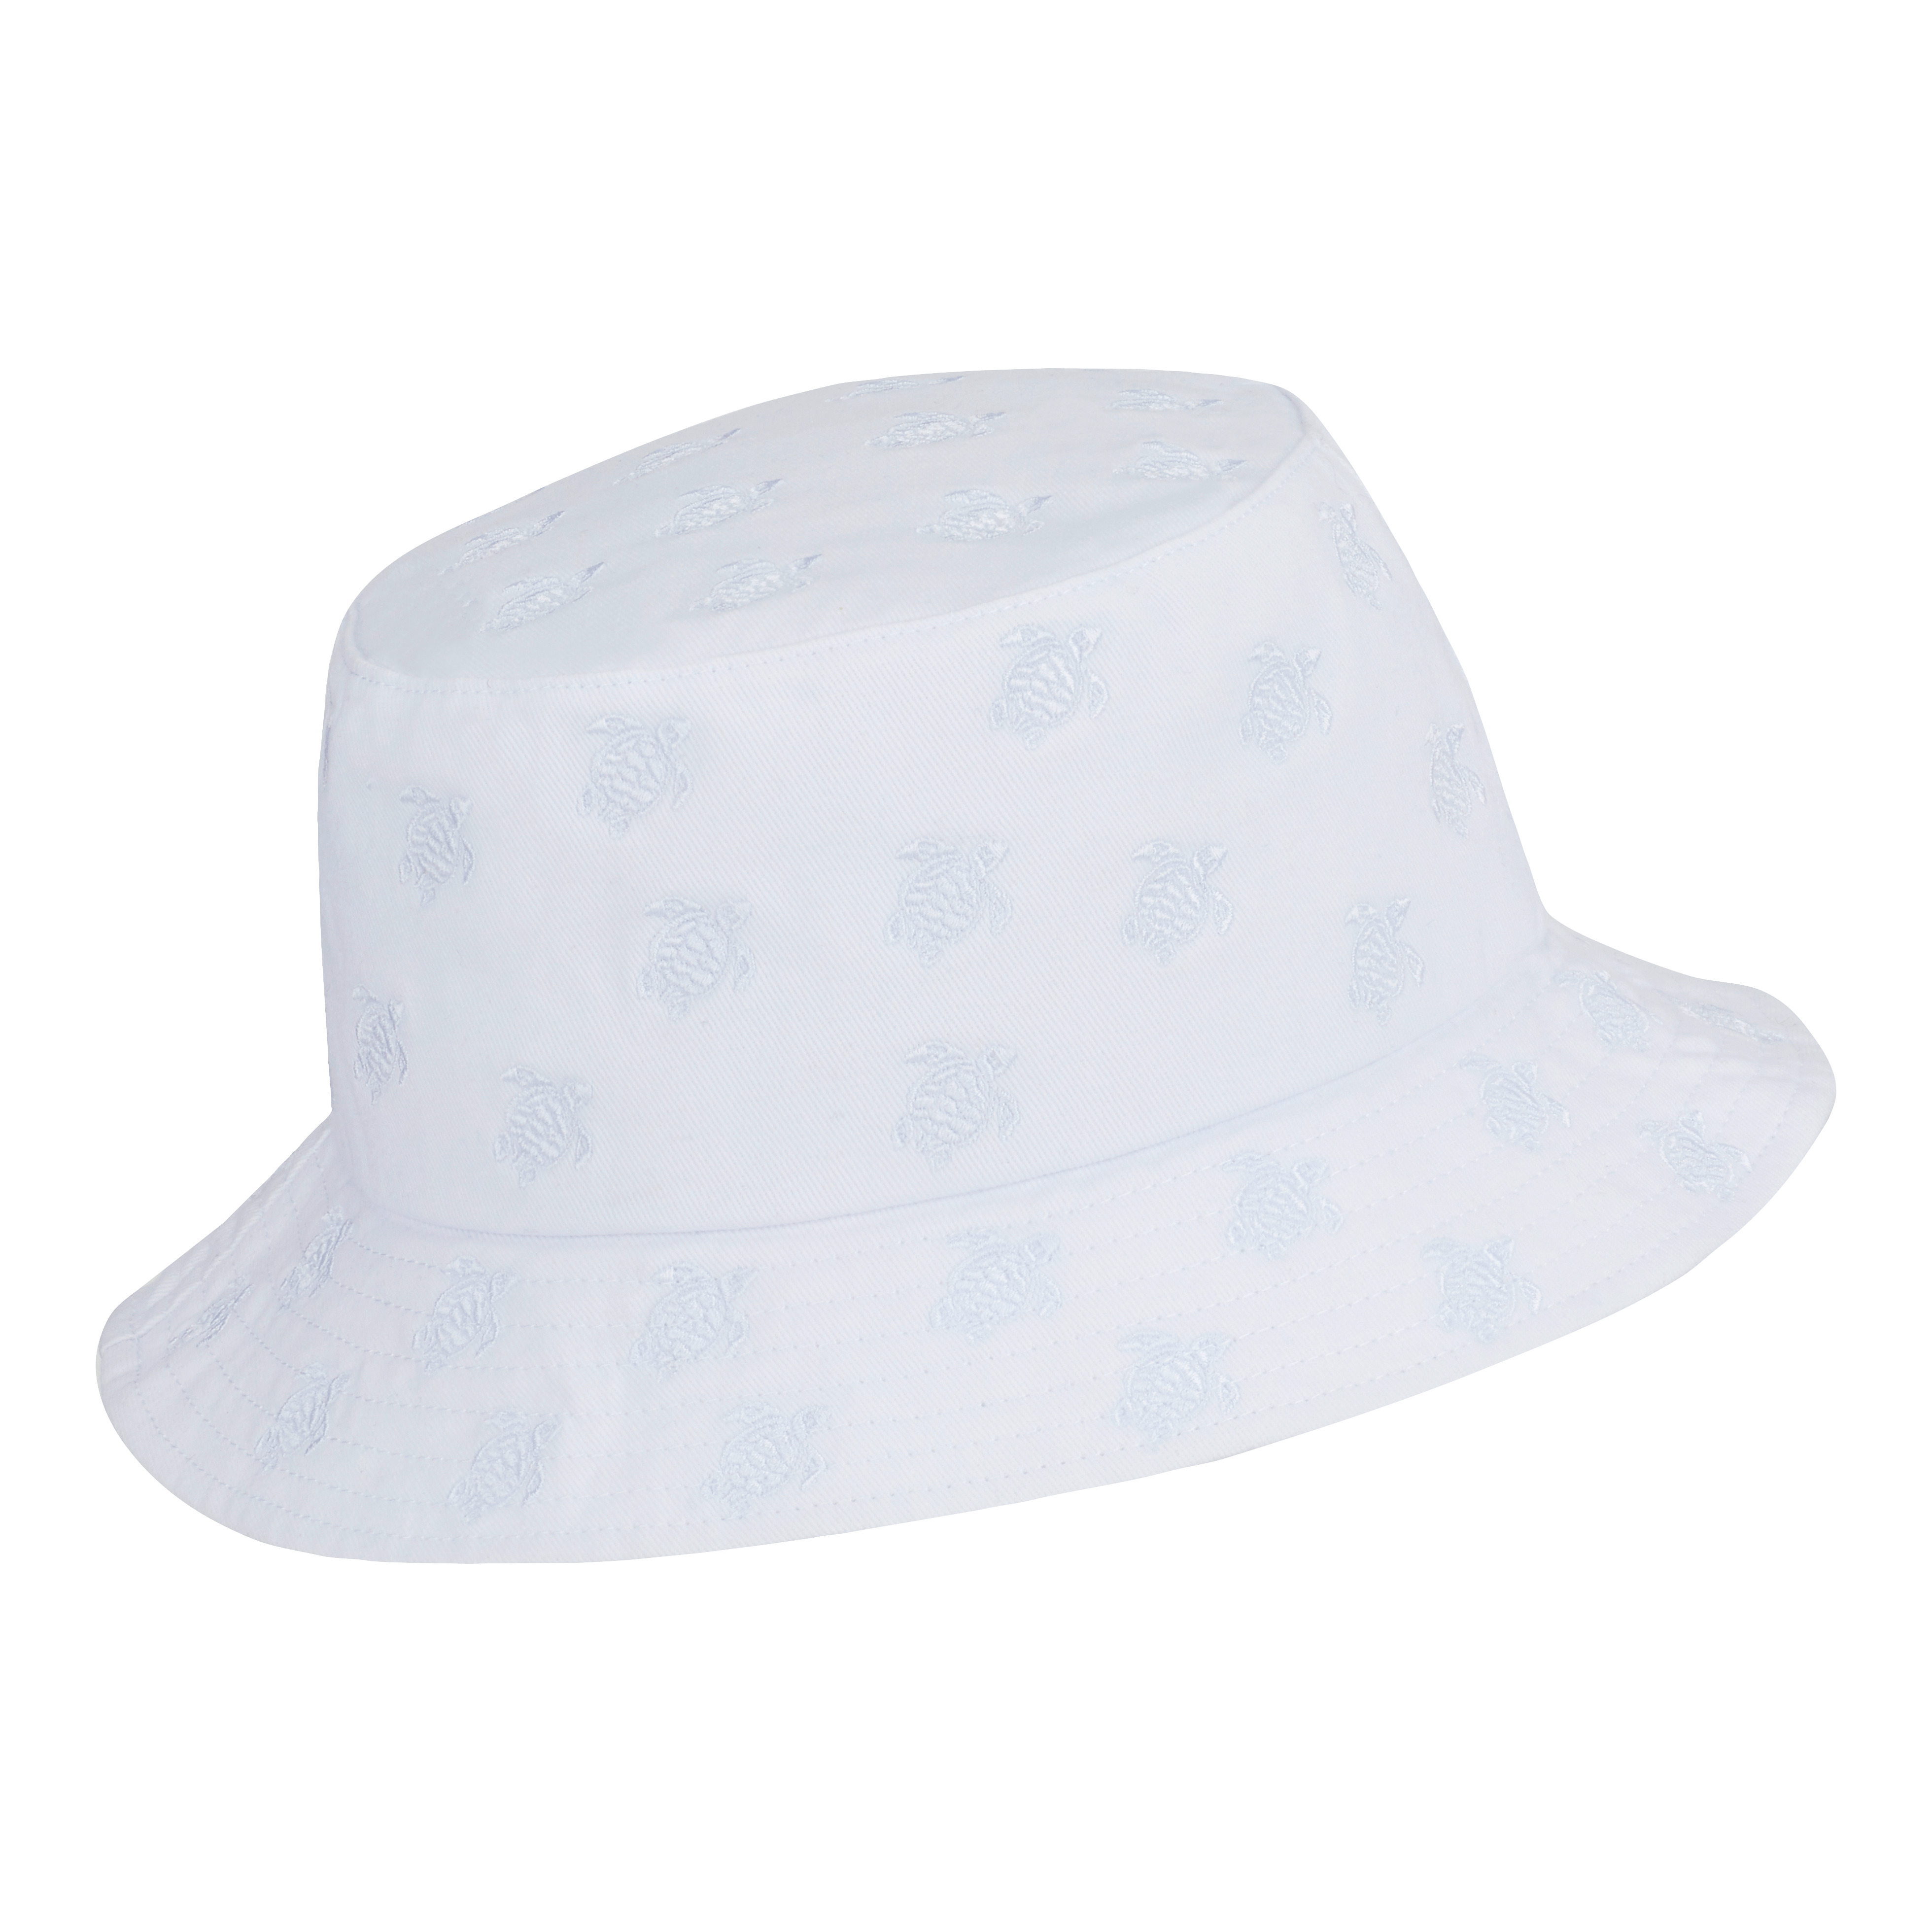 Embroidered Bucket Hat Turtles All Over - 2